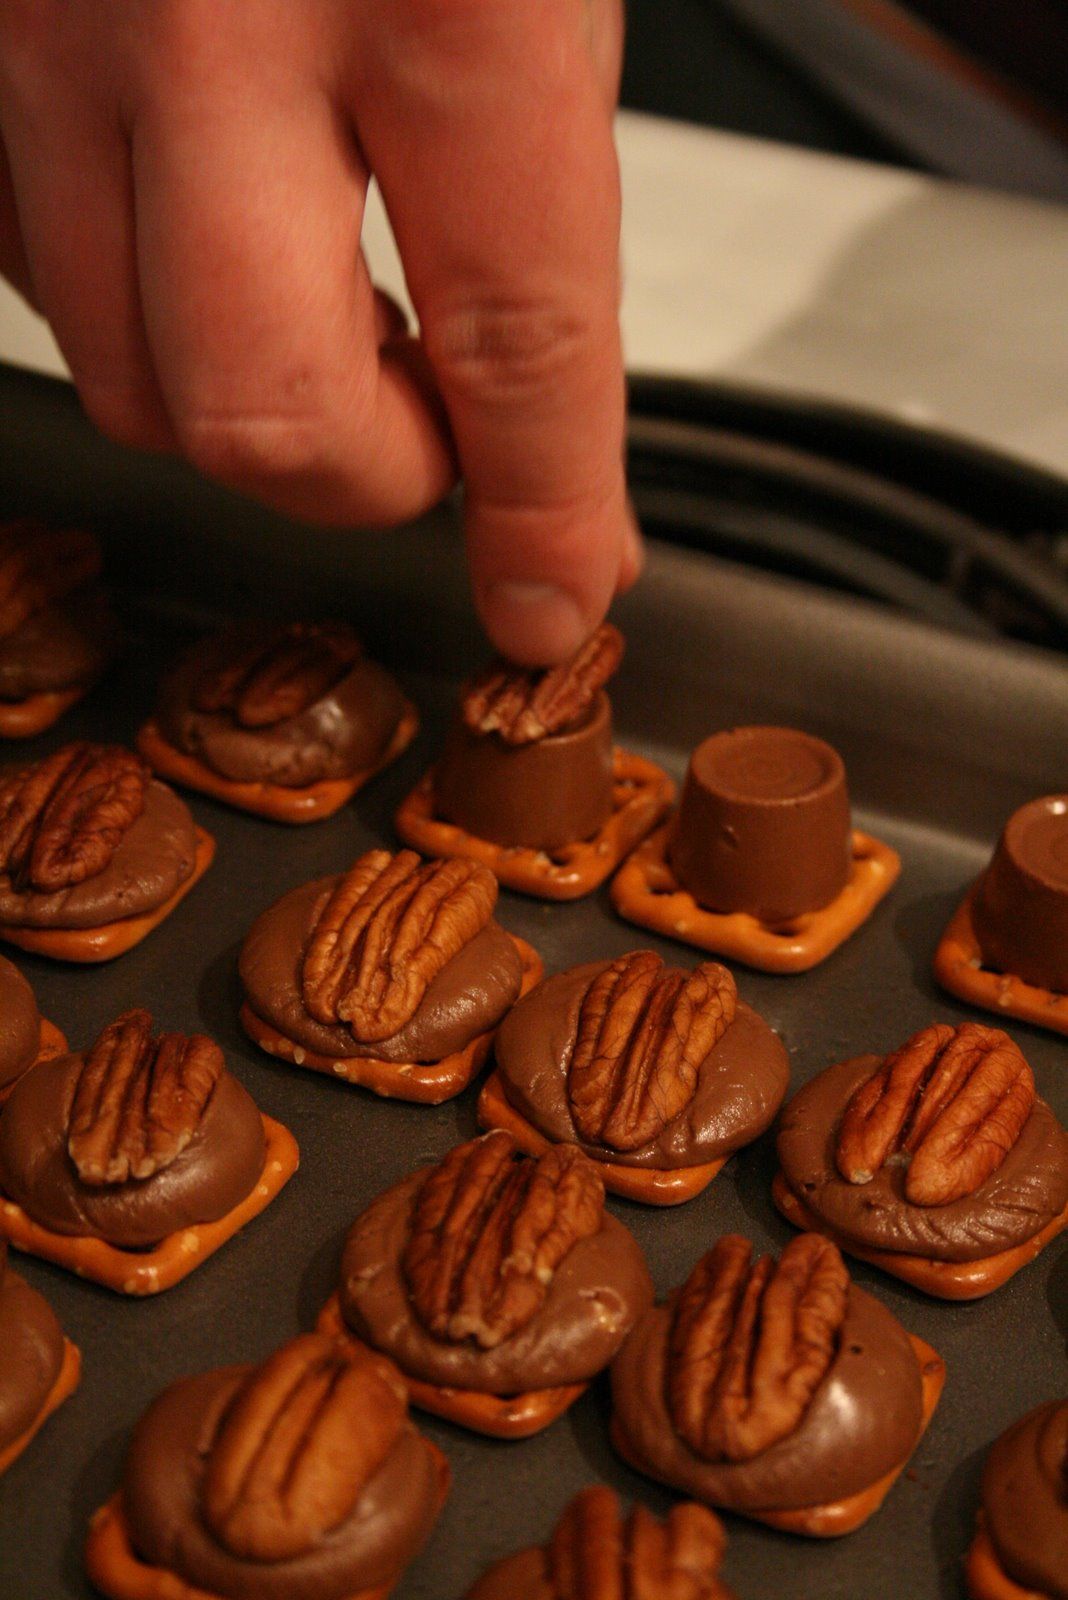 Rolo TURTLES.—a square pretzel, Rolo candy piece, half a pecan and the oven is